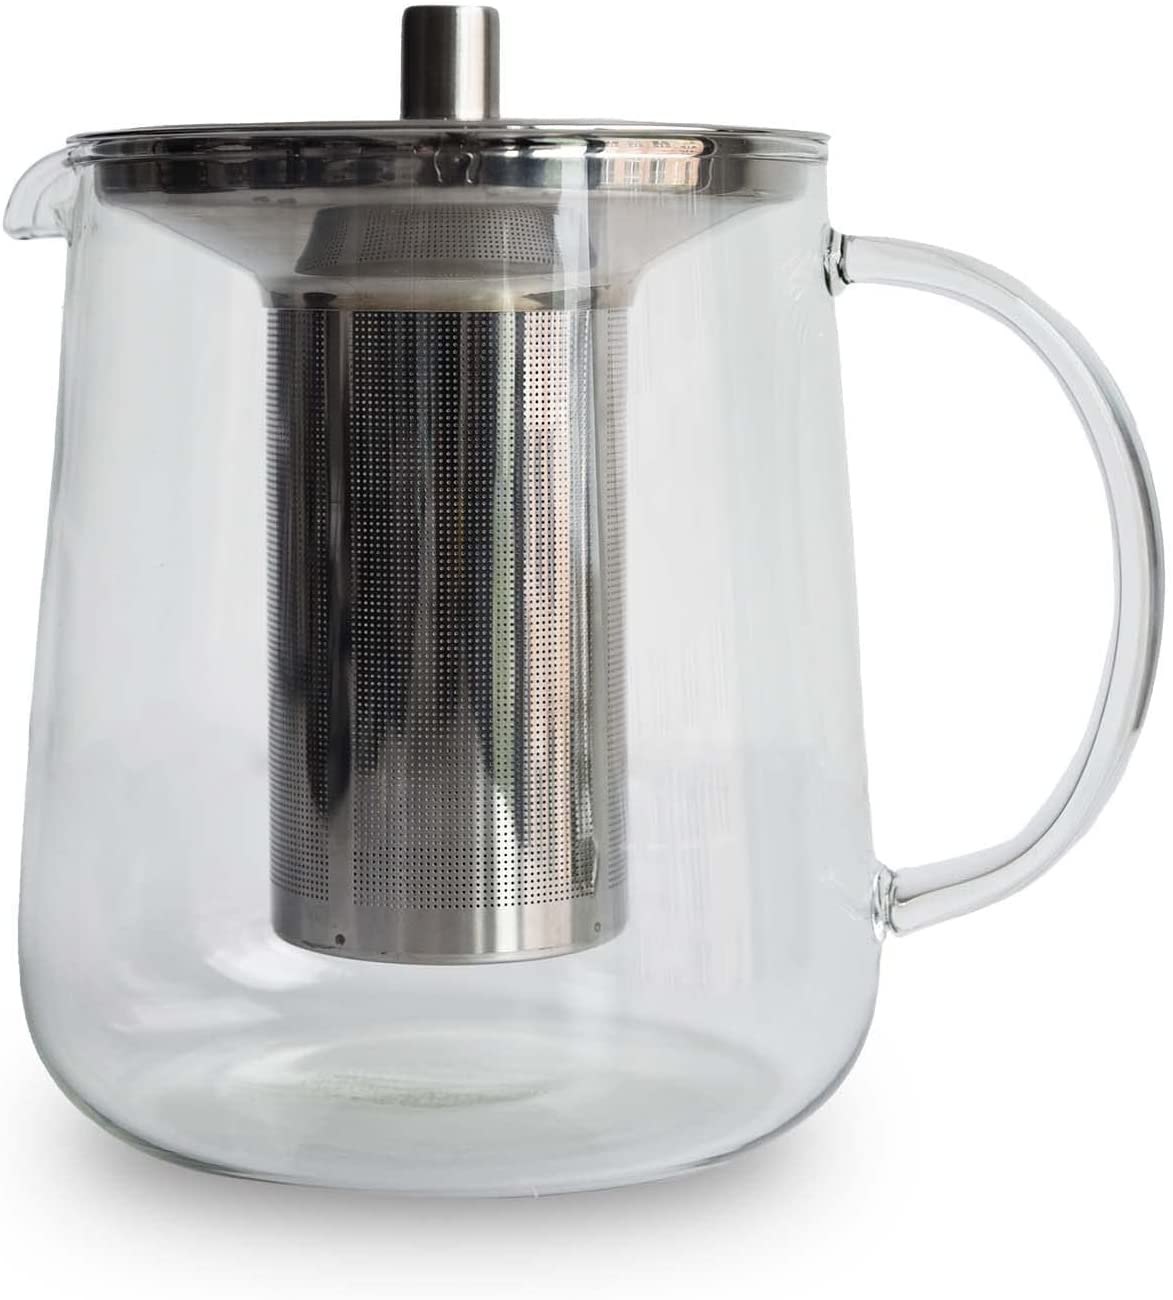 TRINKBASIS Glass Teapot 1 Litre, Teapot Glass, Borosilicate Glass, Heat Resistant, Removable Long Stainless Steel Strainer Rustproof and High-Quality Lid, 3-Piece for Loose Tea, for 4-8 Cups